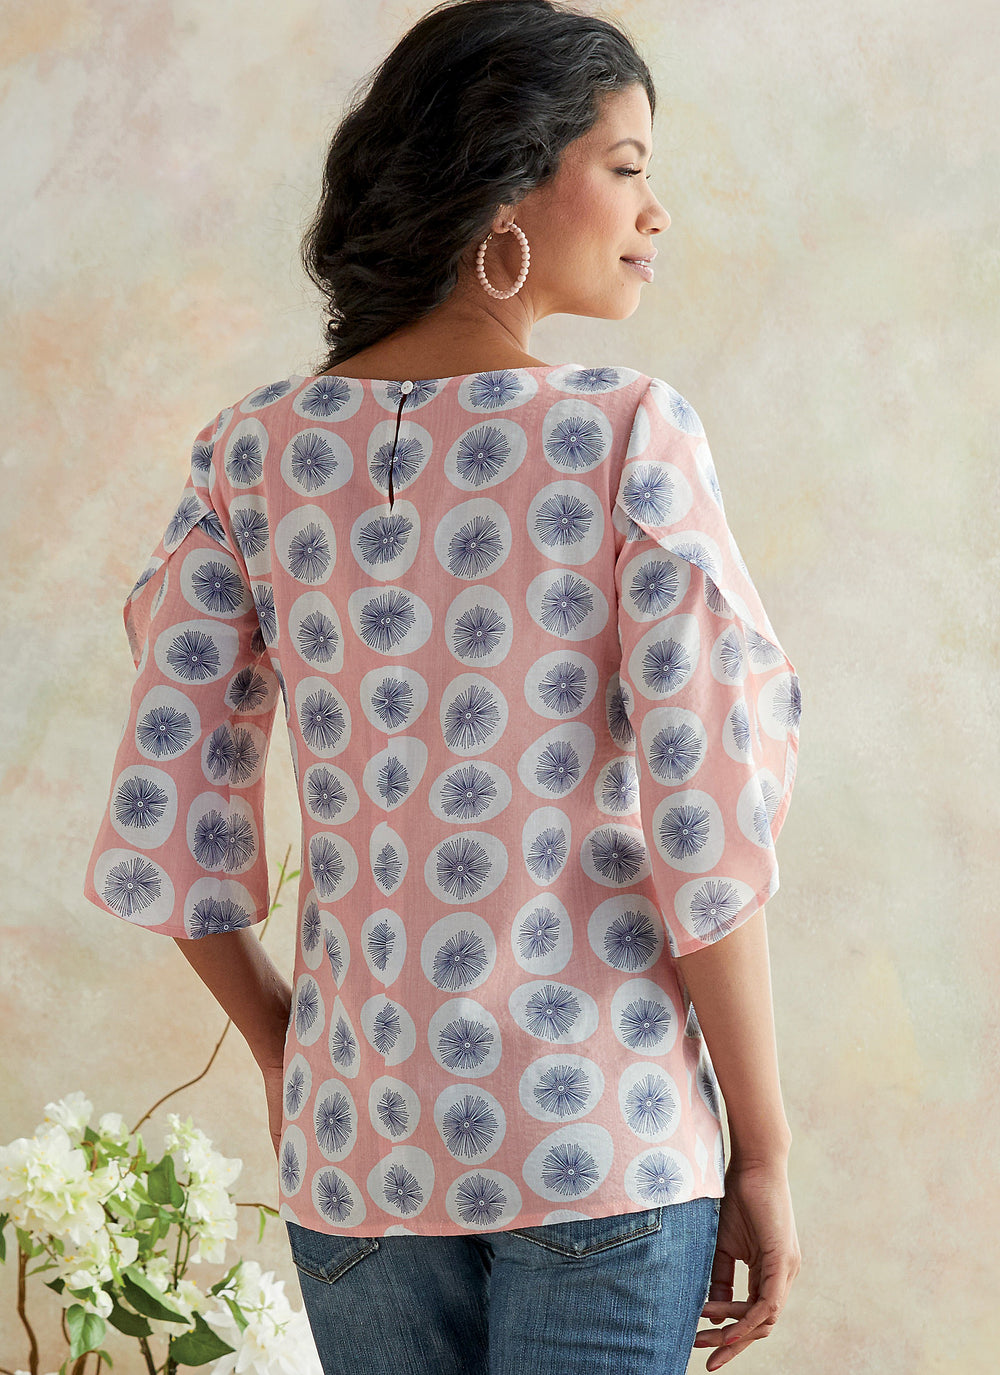 Butterick B6687 Misses' Top | Easy from Jaycotts Sewing Supplies